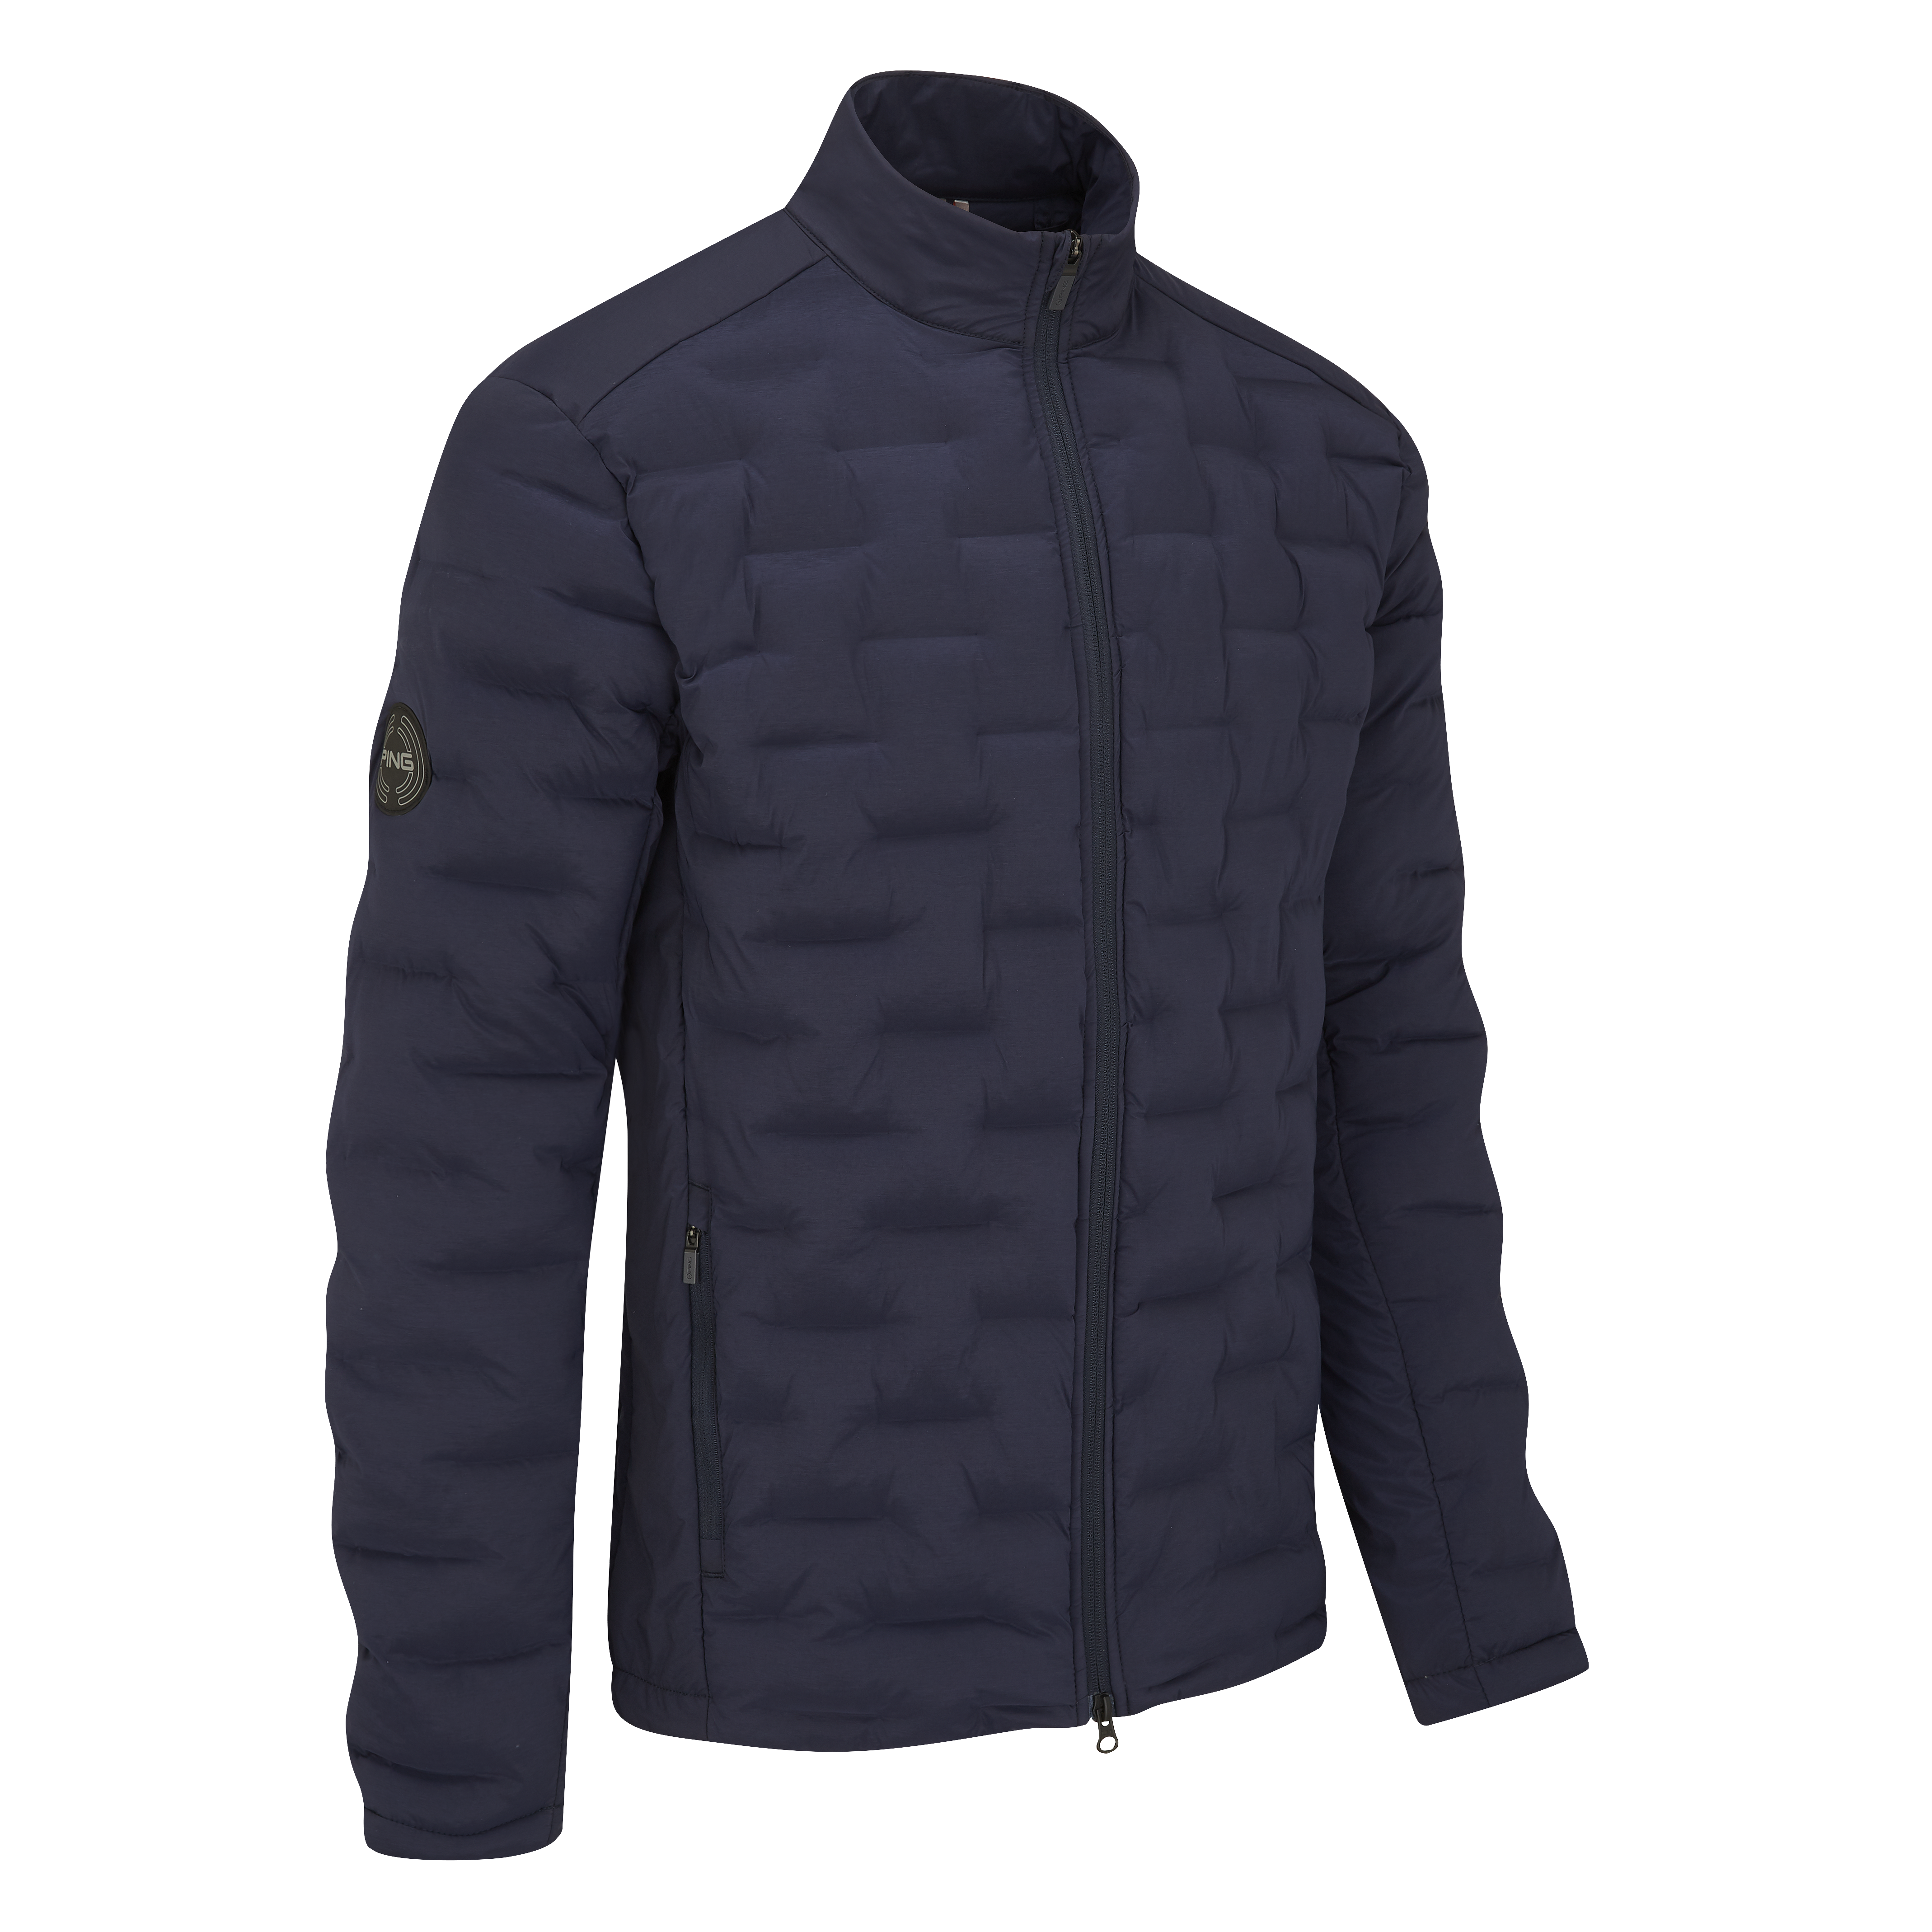 Norse S5 Jacket